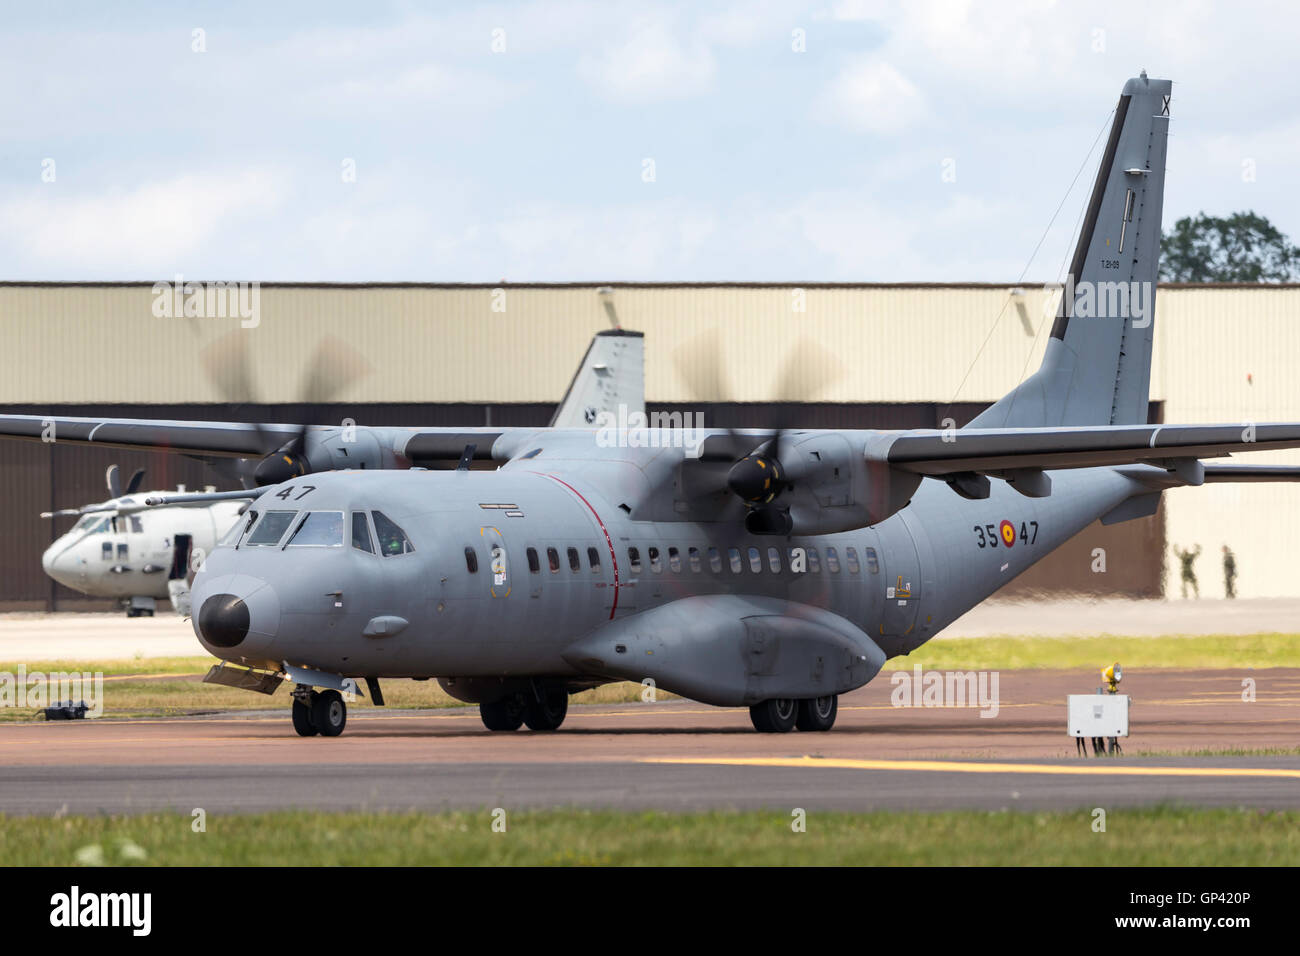 Spanish Air Force (Ejército del Aire) CASA C-295M military cargo aircraft Stock Photo